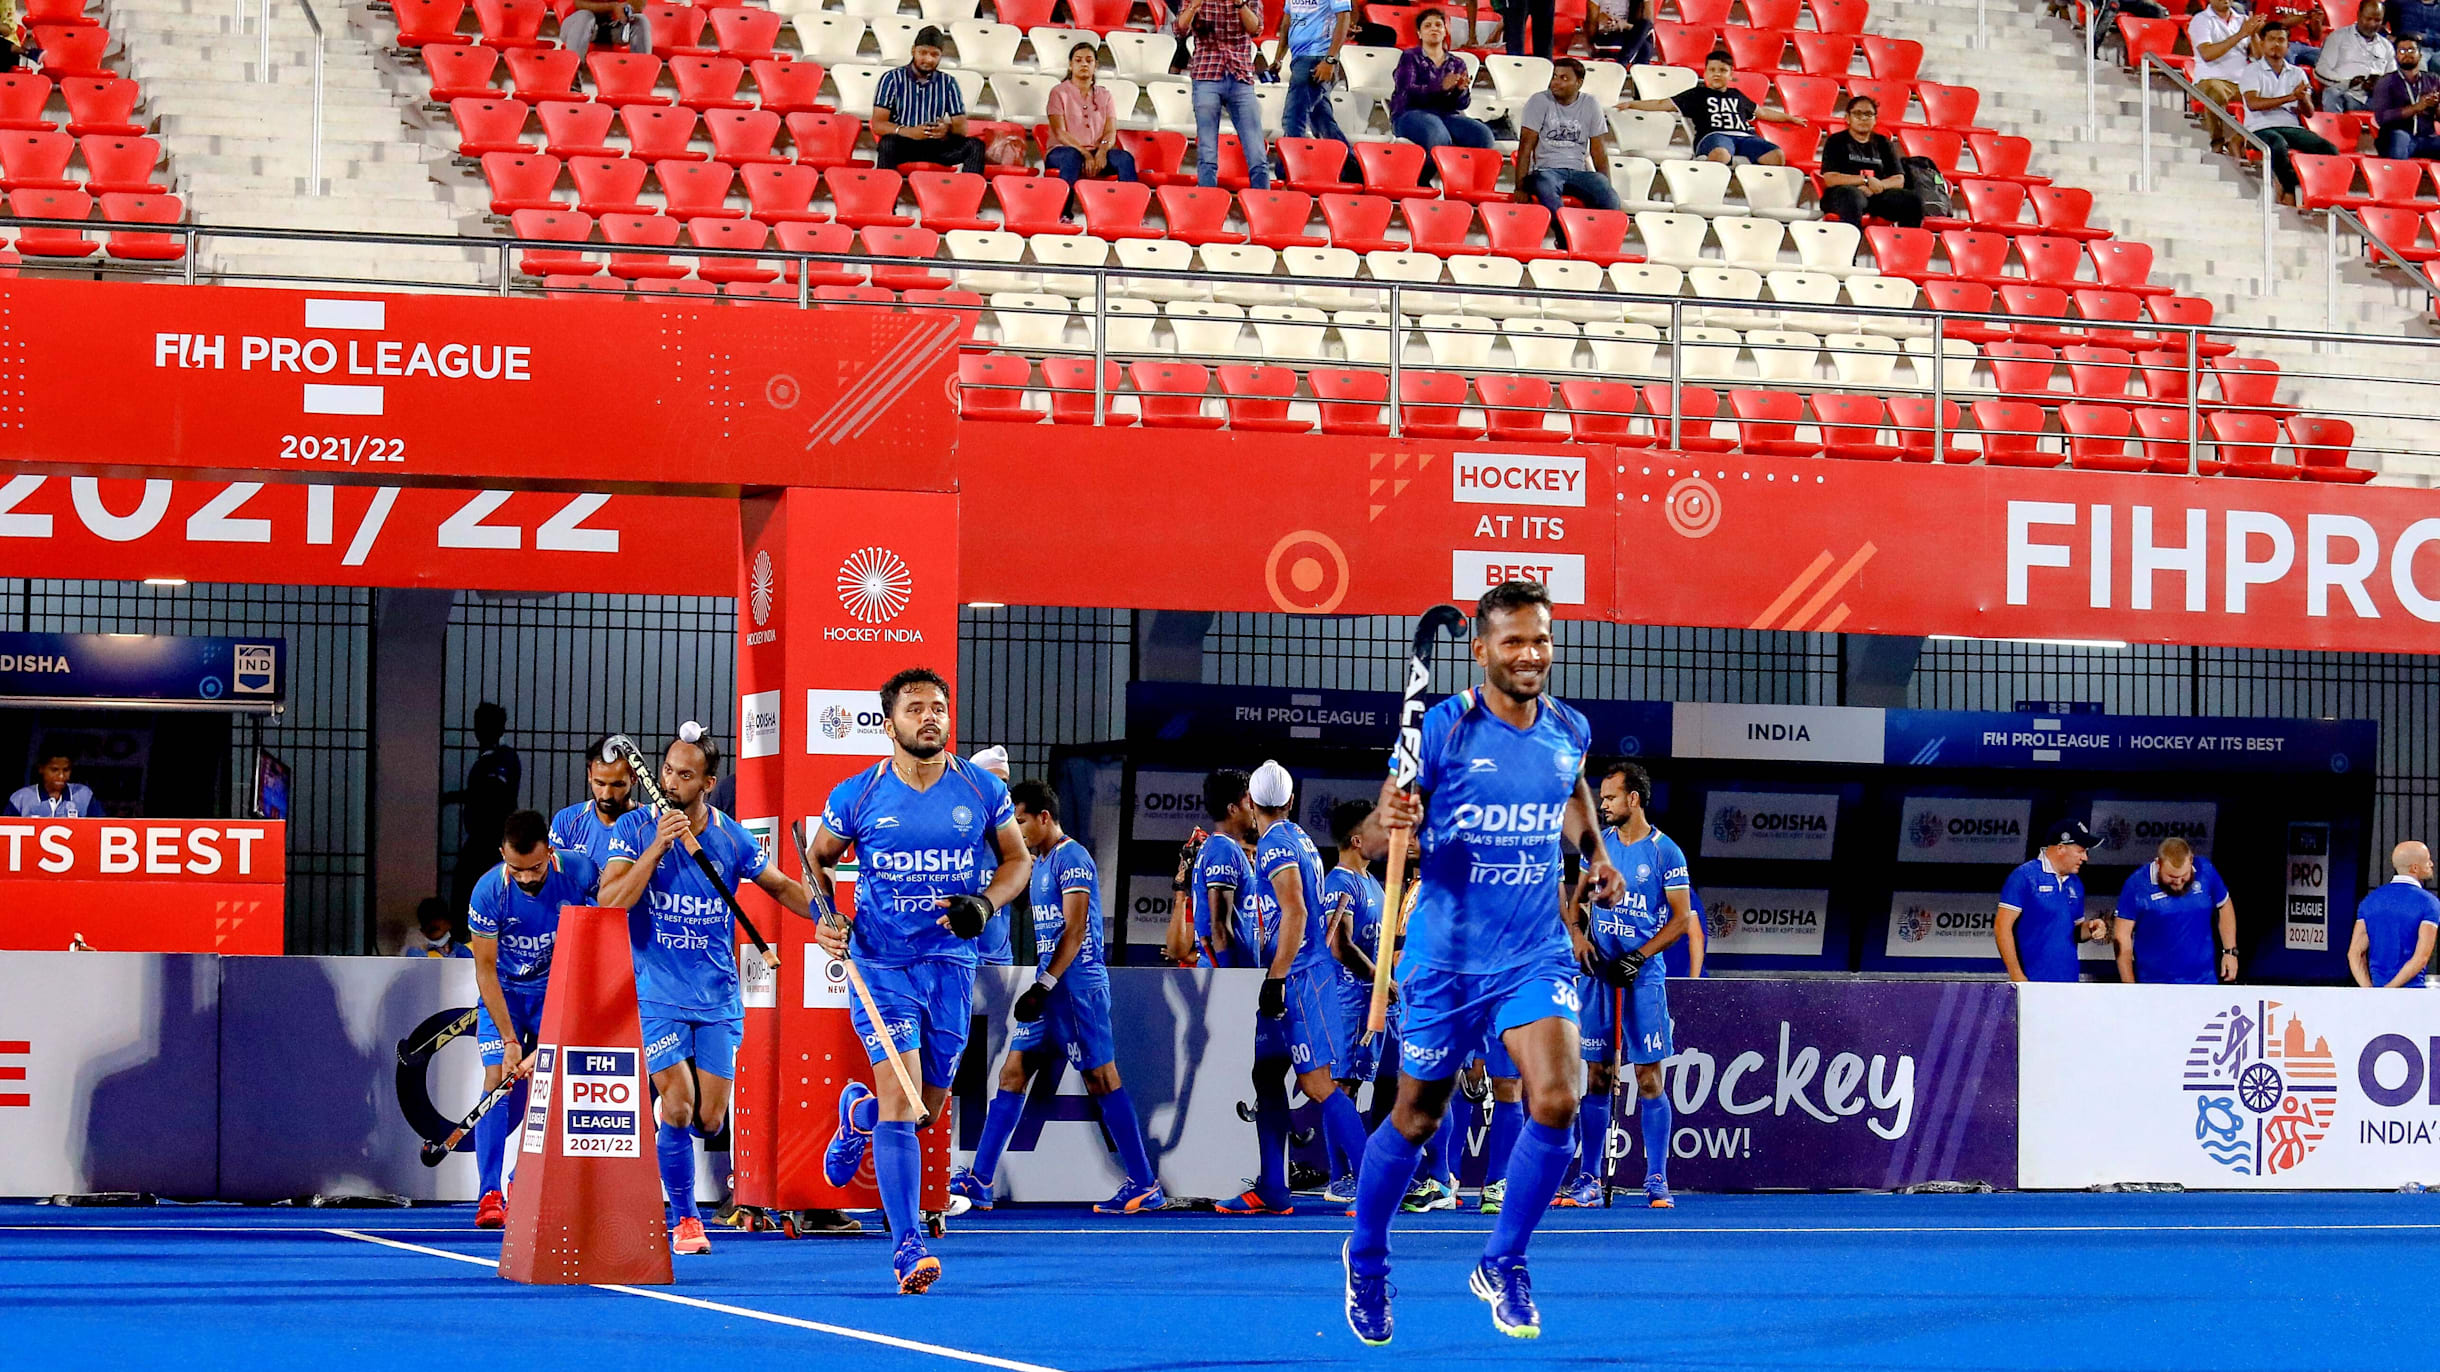 Mens FIH Pro League 2021-22 India vs Belgium, watch hockey live streaming and telecast in India